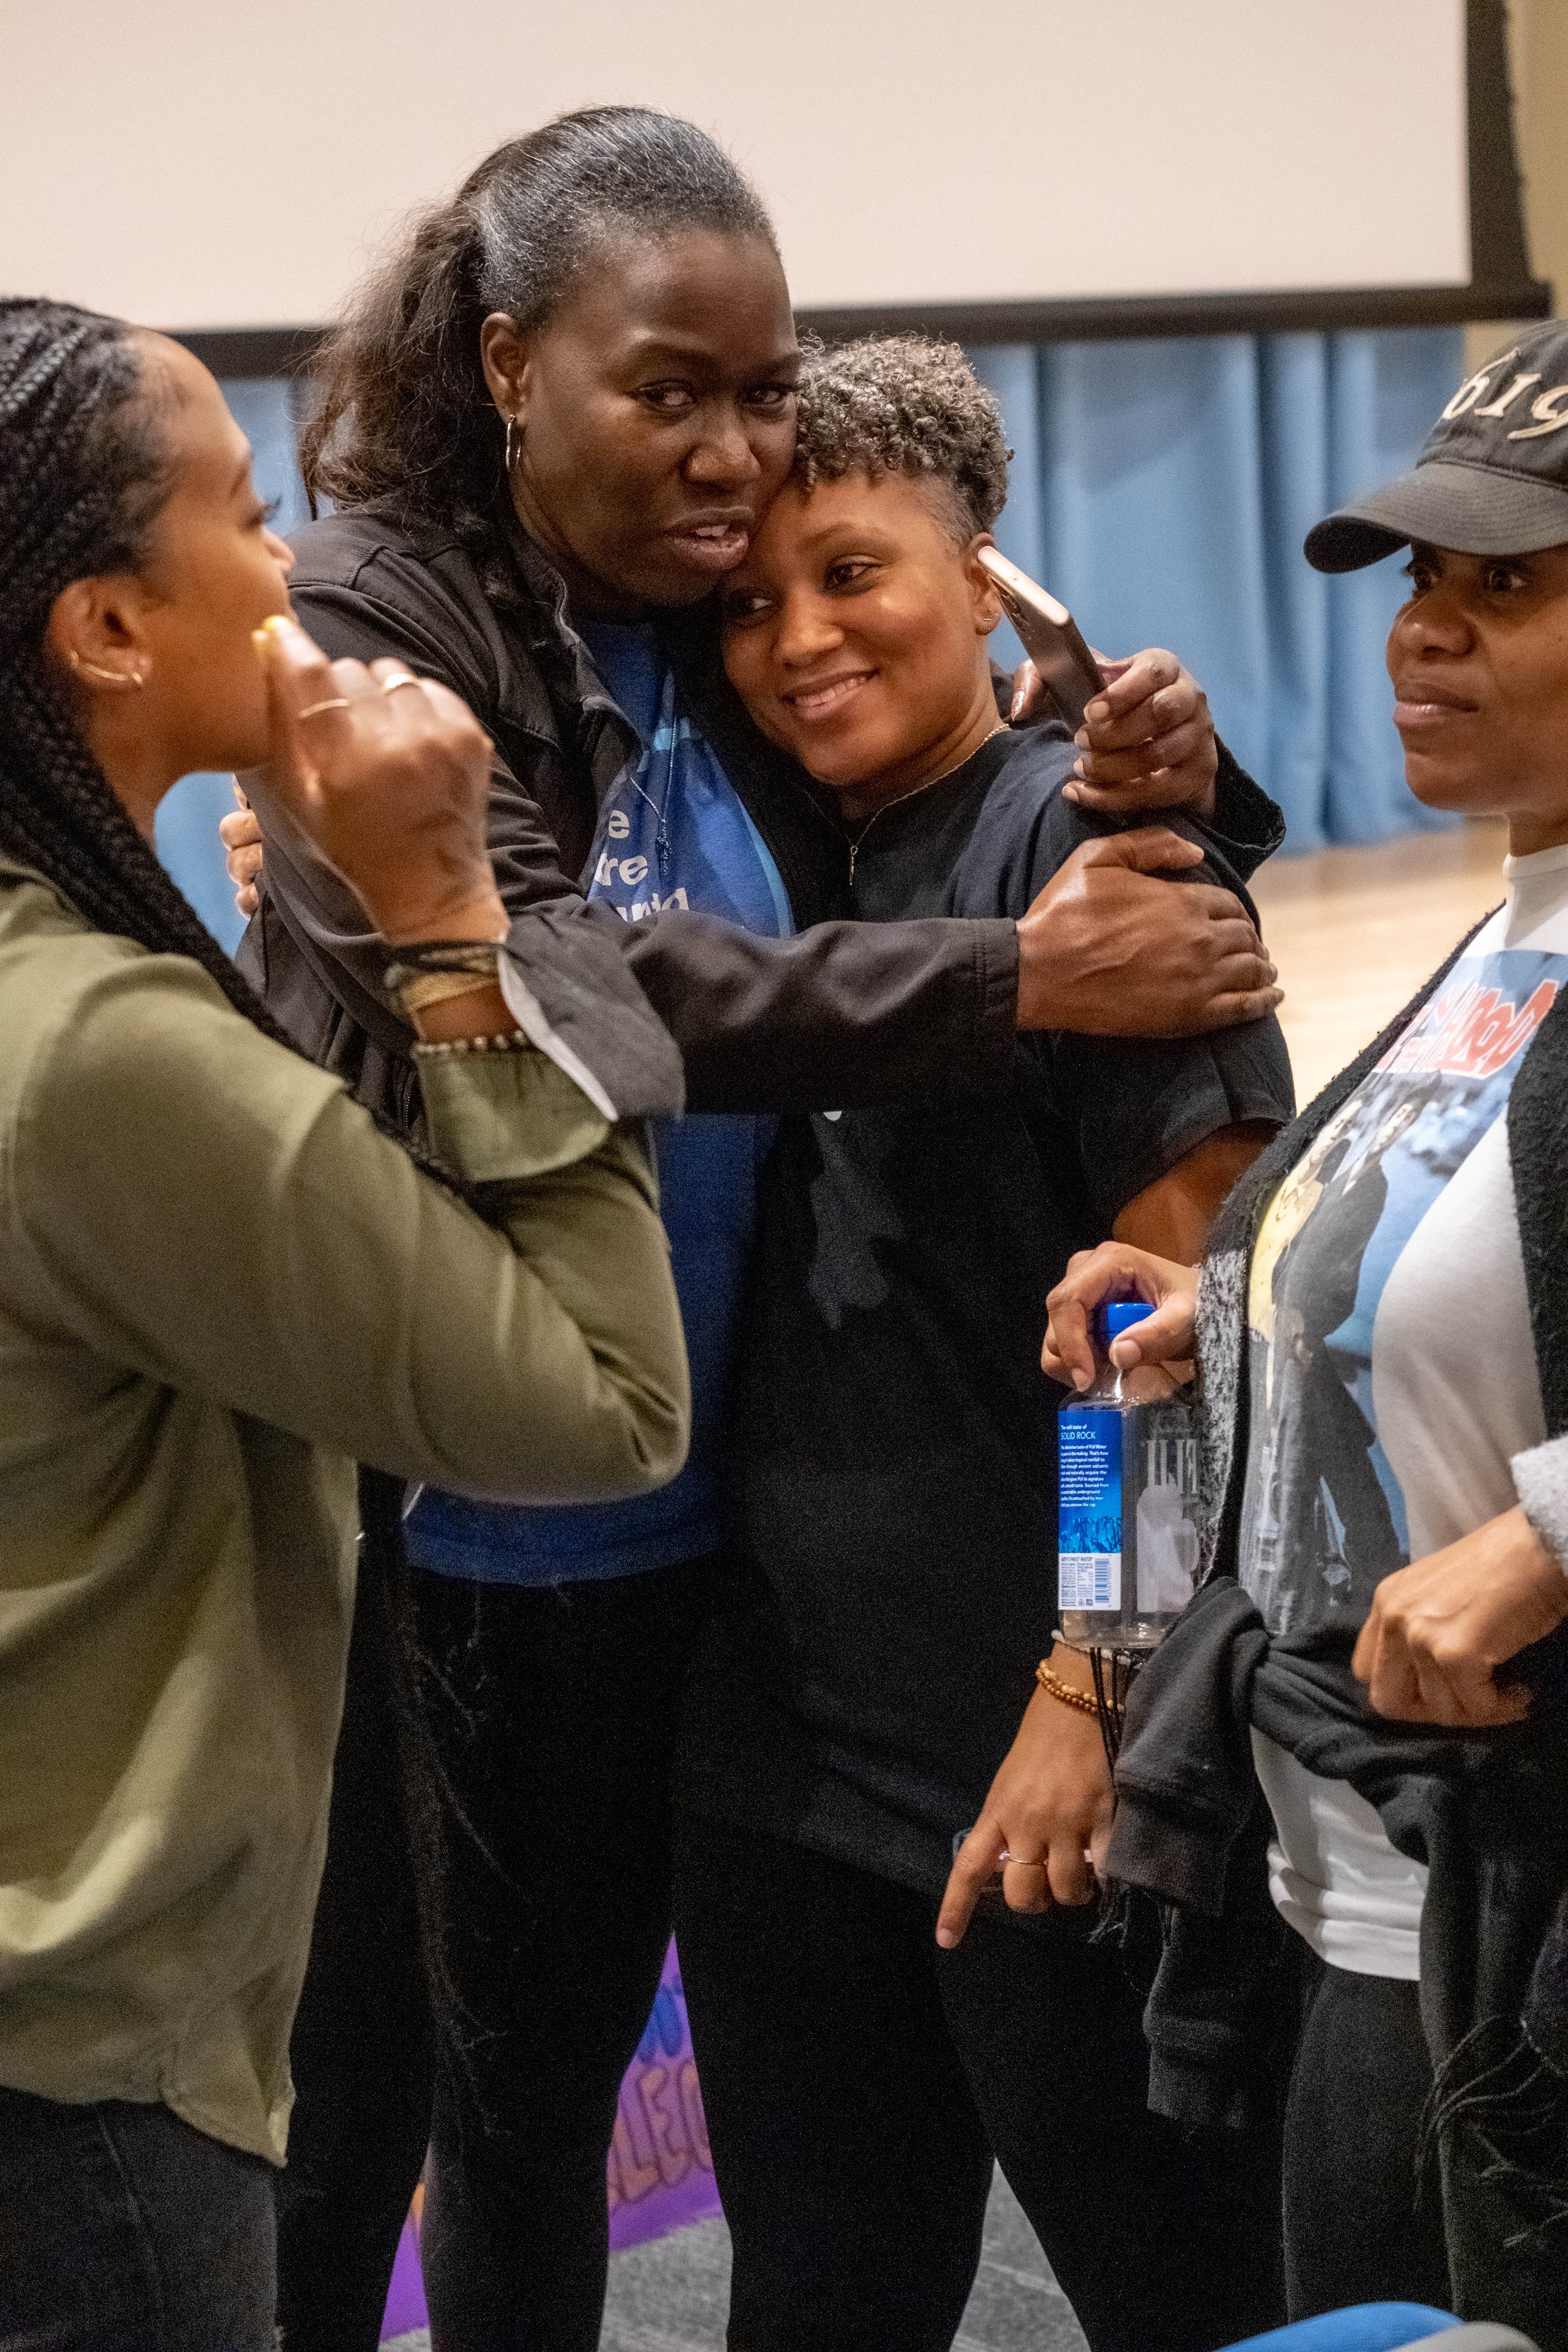  From L to R, Rhea Pitre, Ericka Lesley, Jocelyn Wynn, and Nicole Woodard in conversation and community at the community gathering in lieu of a protest against the play "By The River Rivanna" in the Student Services Orientation Hall on the main campu